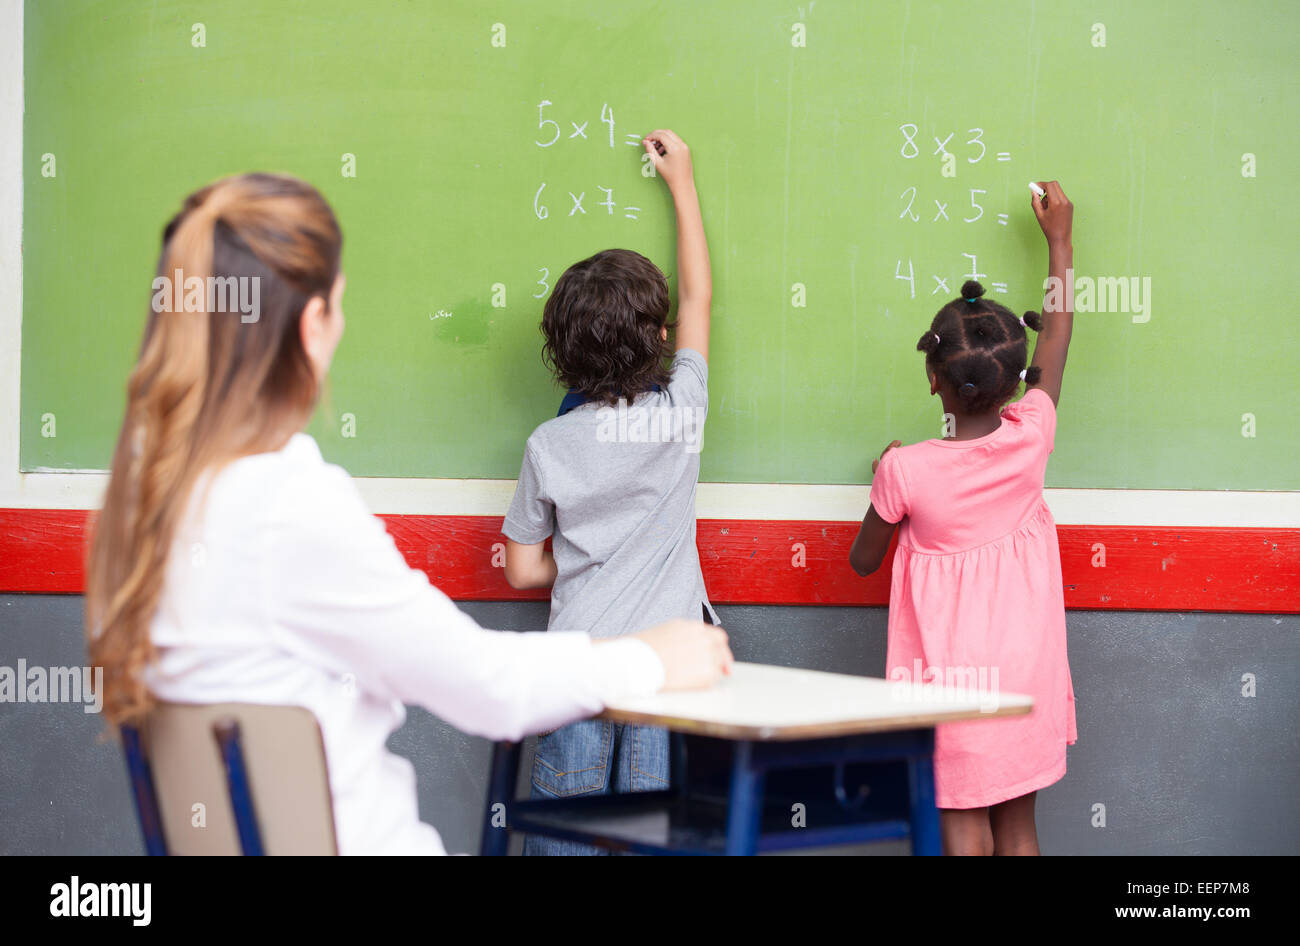 Learning mathematics at elementary school. Multi ethnic students writing on chalkboard with teacher observing. Stock Photo